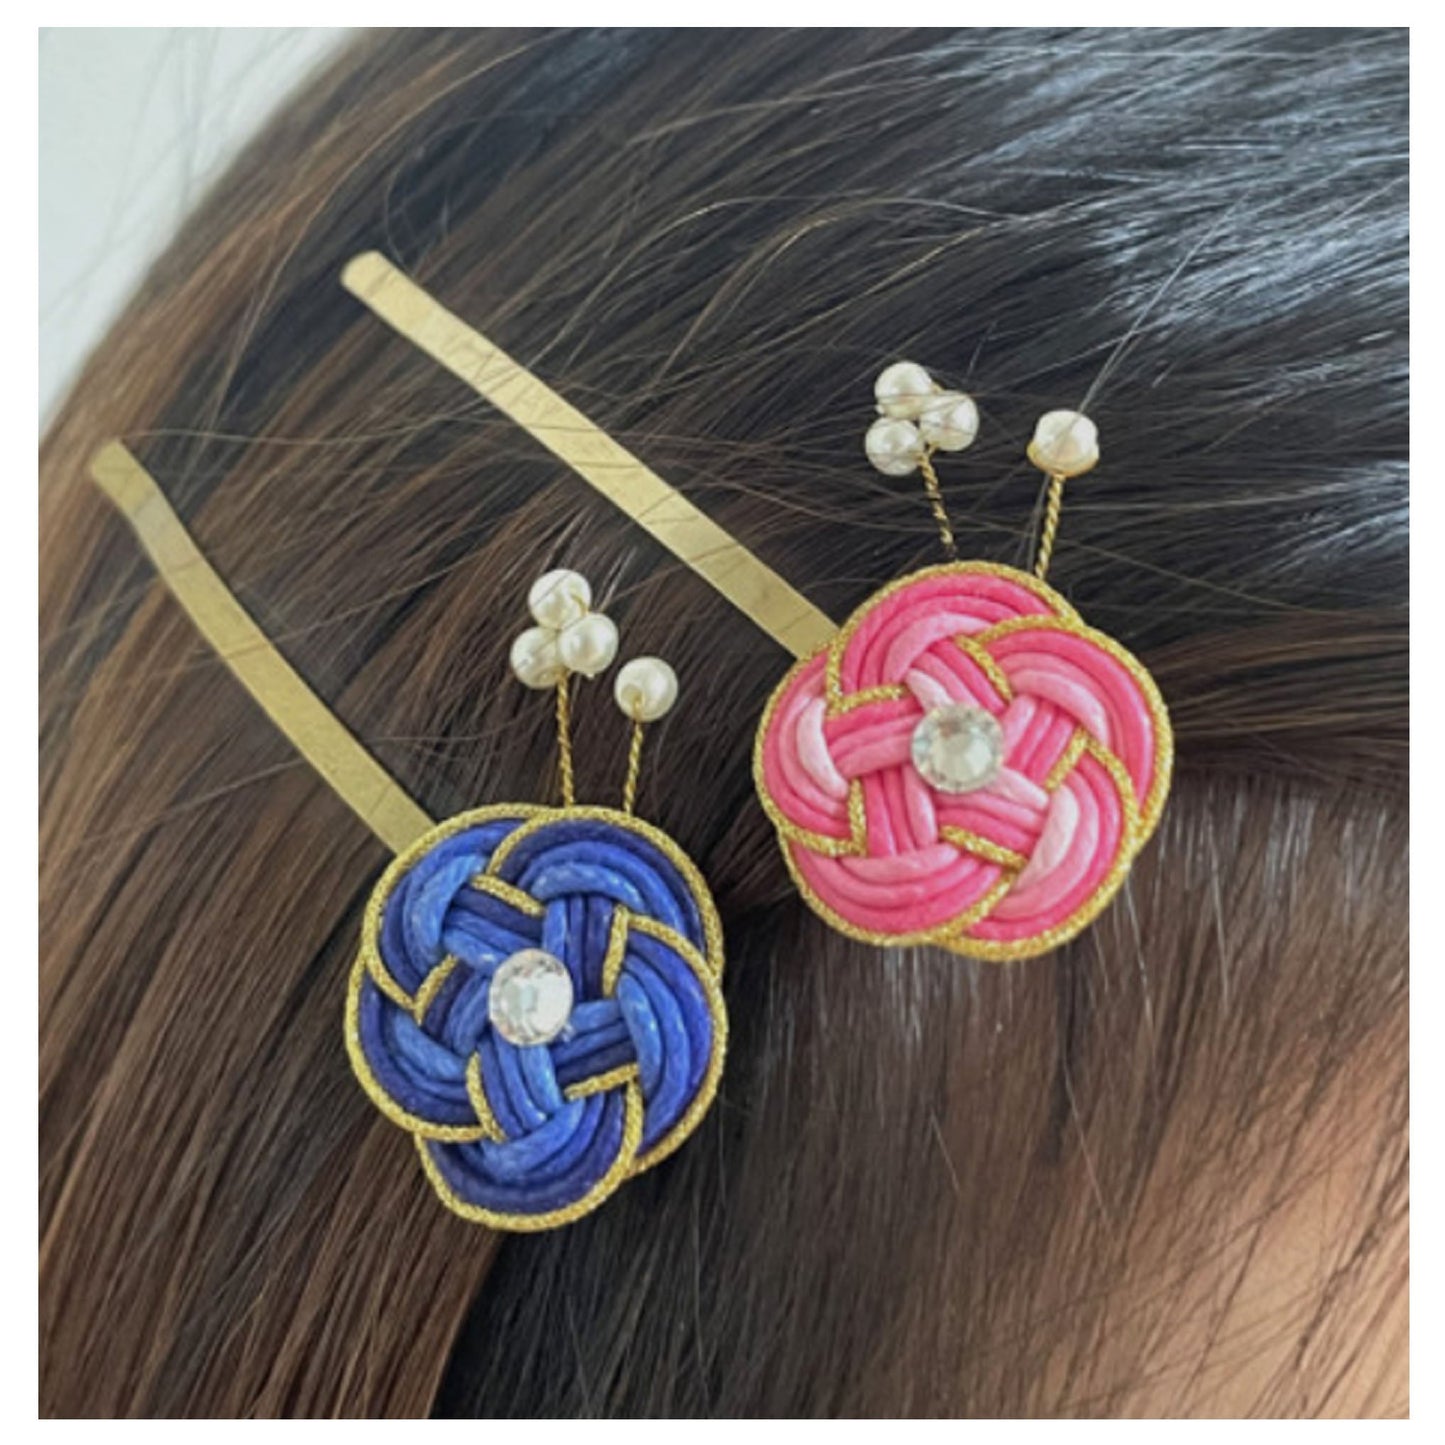 Hair Pin with Swarovski Cubic, Pearl and Korean Traditional Knot. a Transparent Case. Pink Color